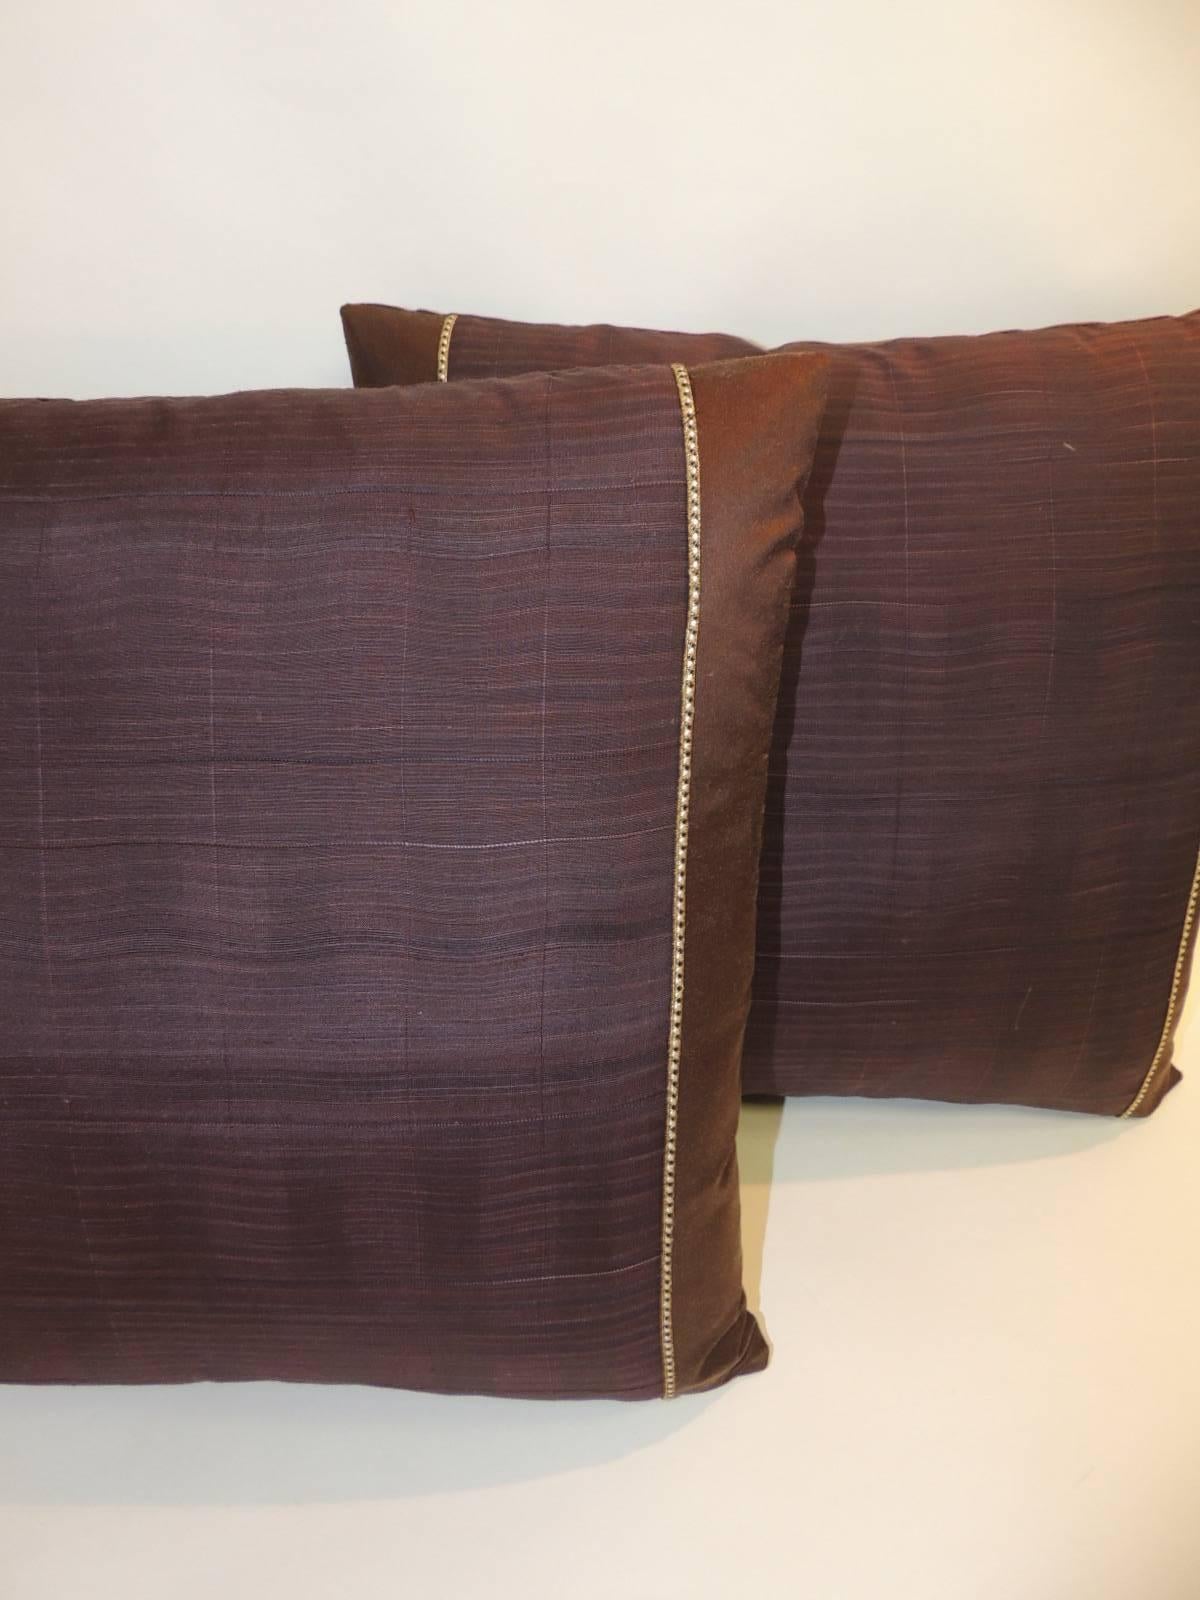 Iridescent Obi pillows textile framed with chocolate brown silk and embellished with a small woven trim in shades of gold, black and white. Backing of decorative pillows is the same as the frame in the front. Decorative square pillows handcrafted